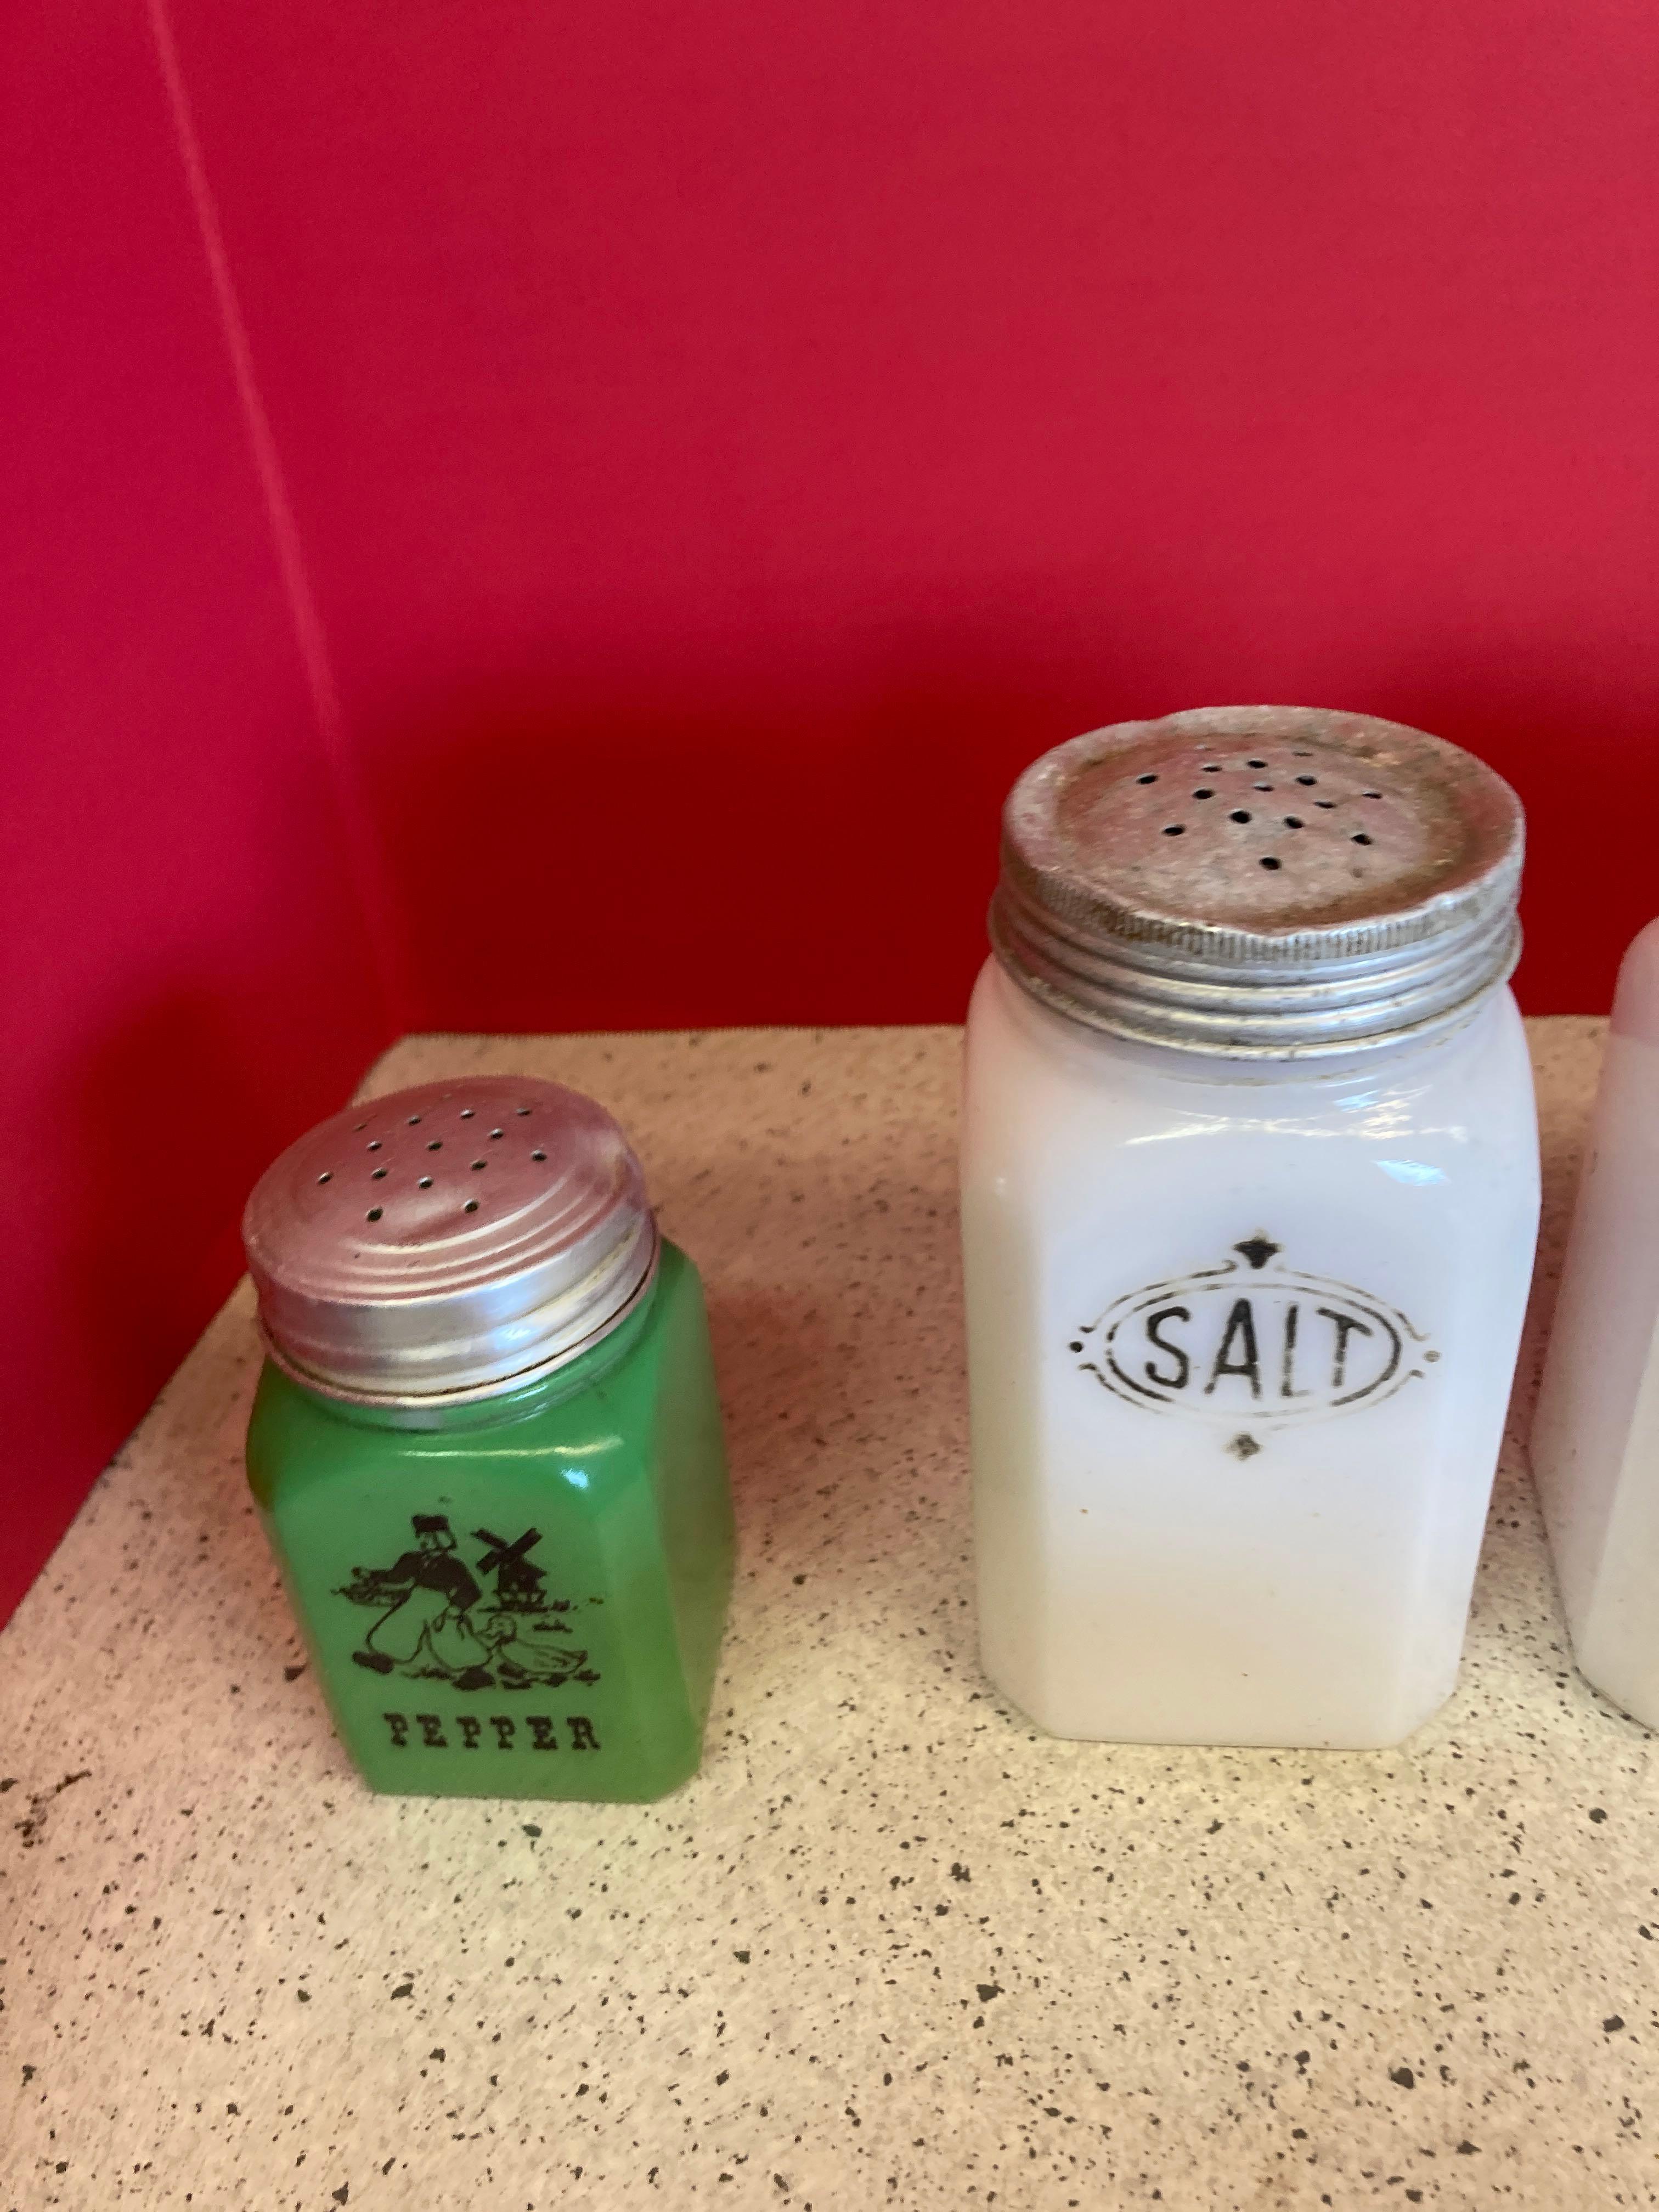 Very nice set of salt and pepper shakers